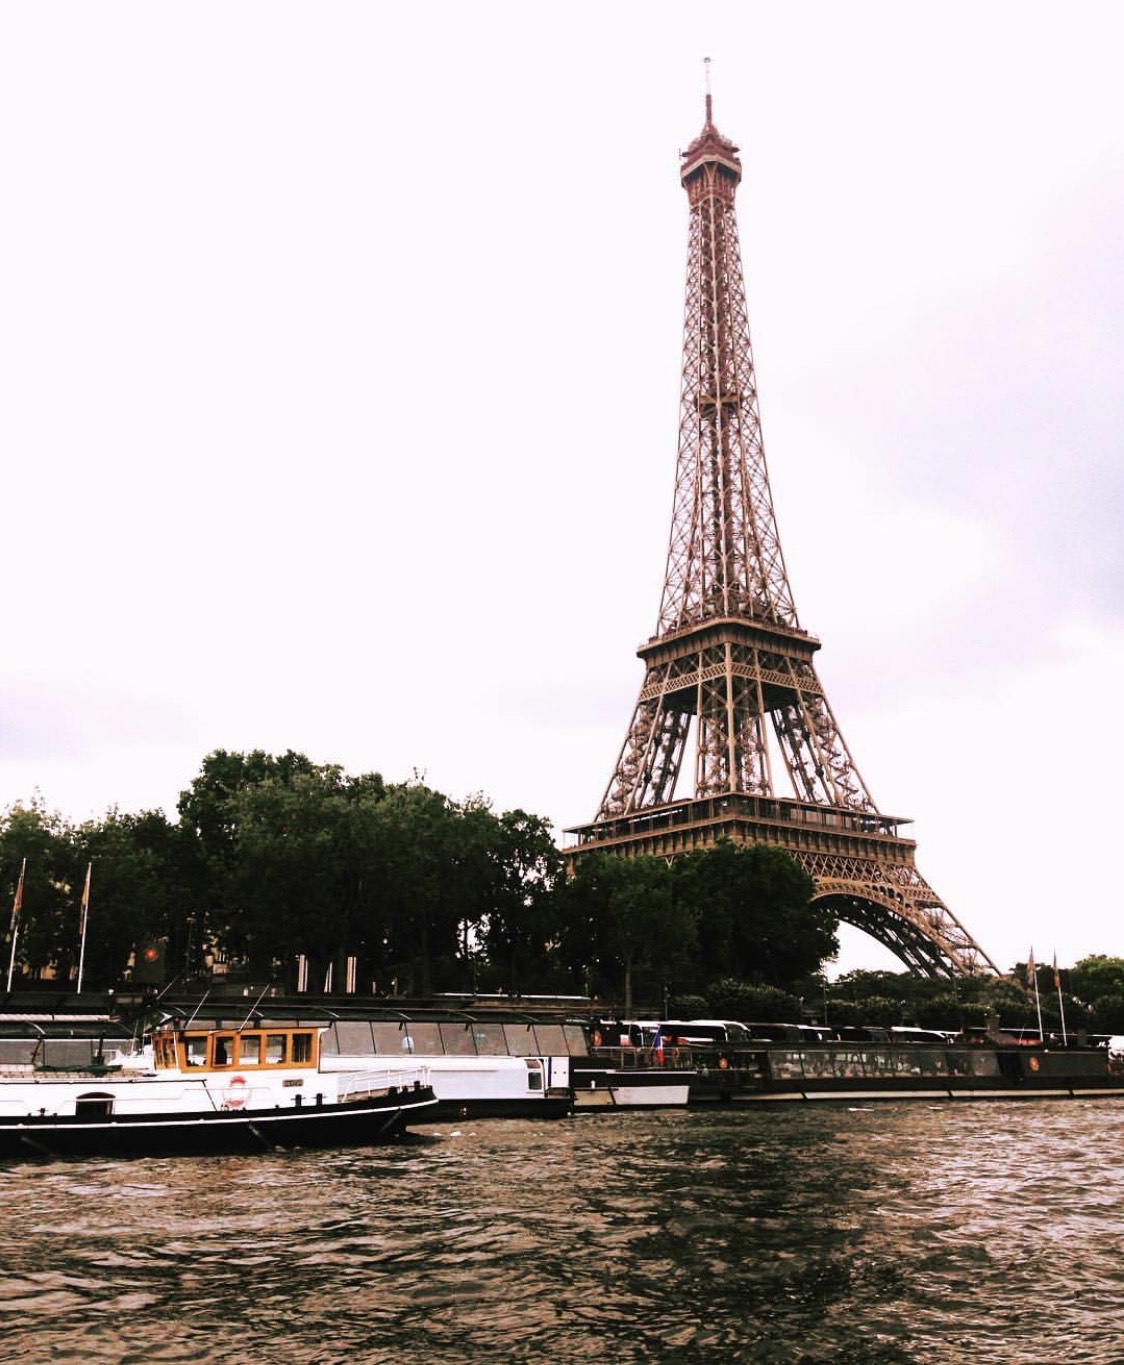 The Eiffel Tower from the River